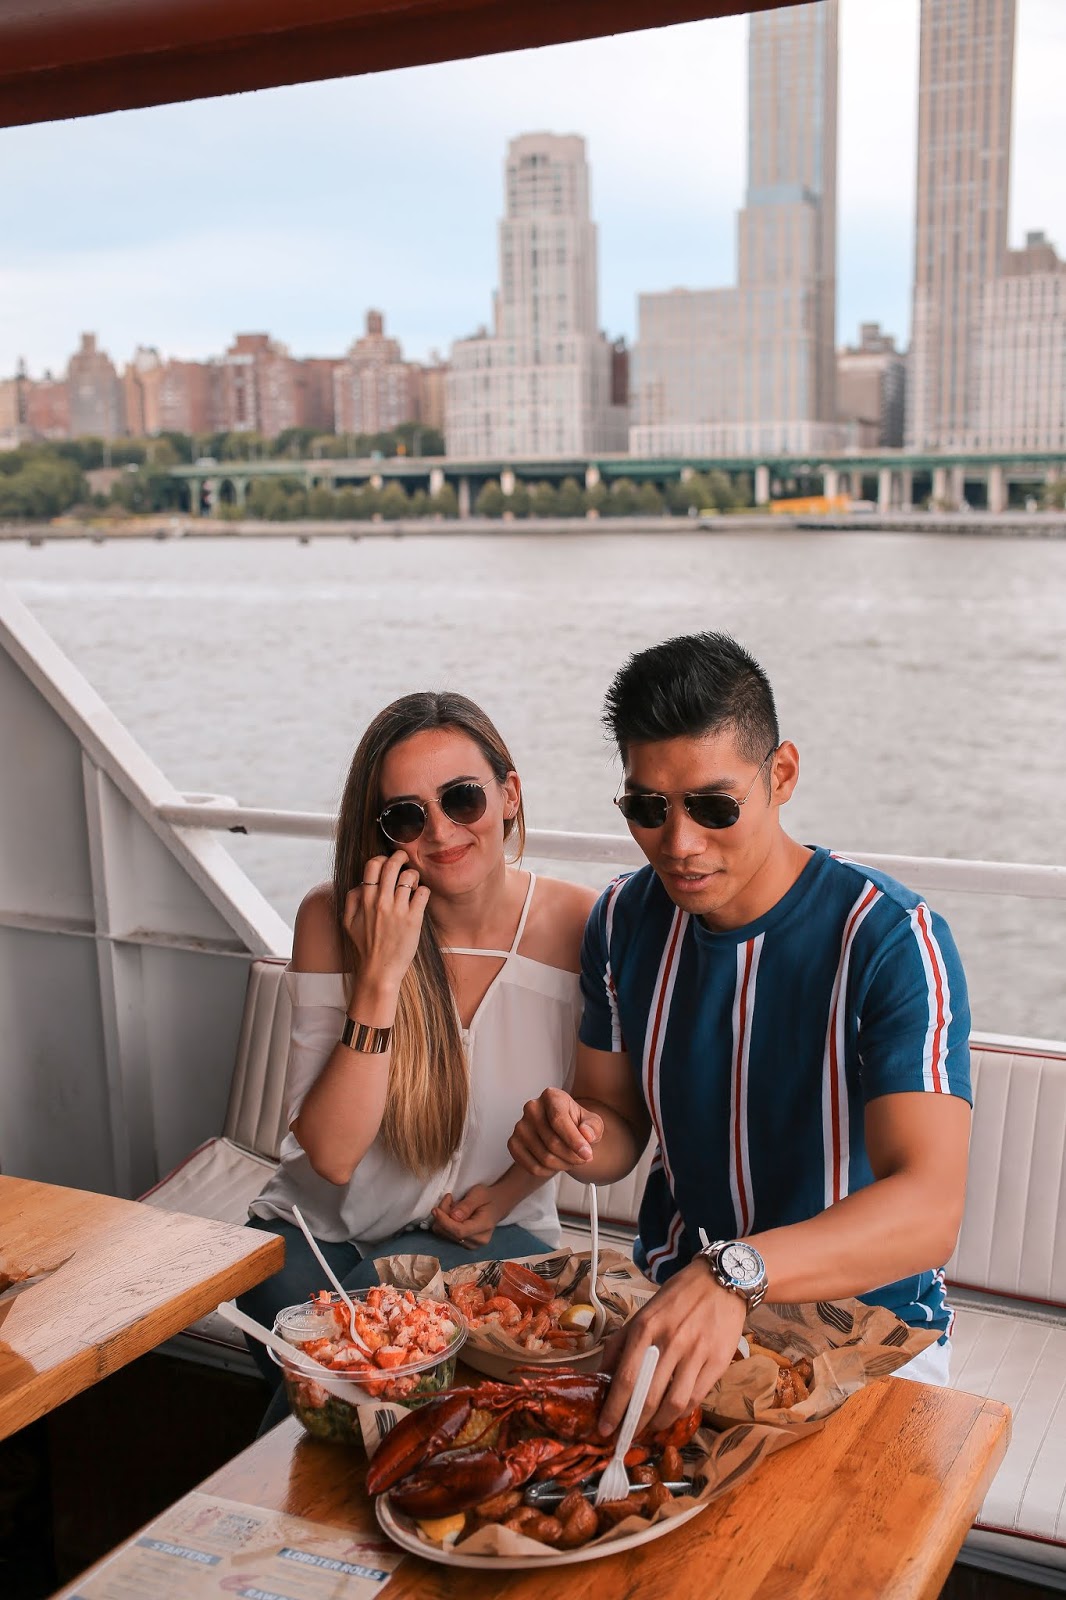 Leo Chan wearing Nautical Inspired Outfit | Asian Model and Blogger, Interracial Couple, AMWF